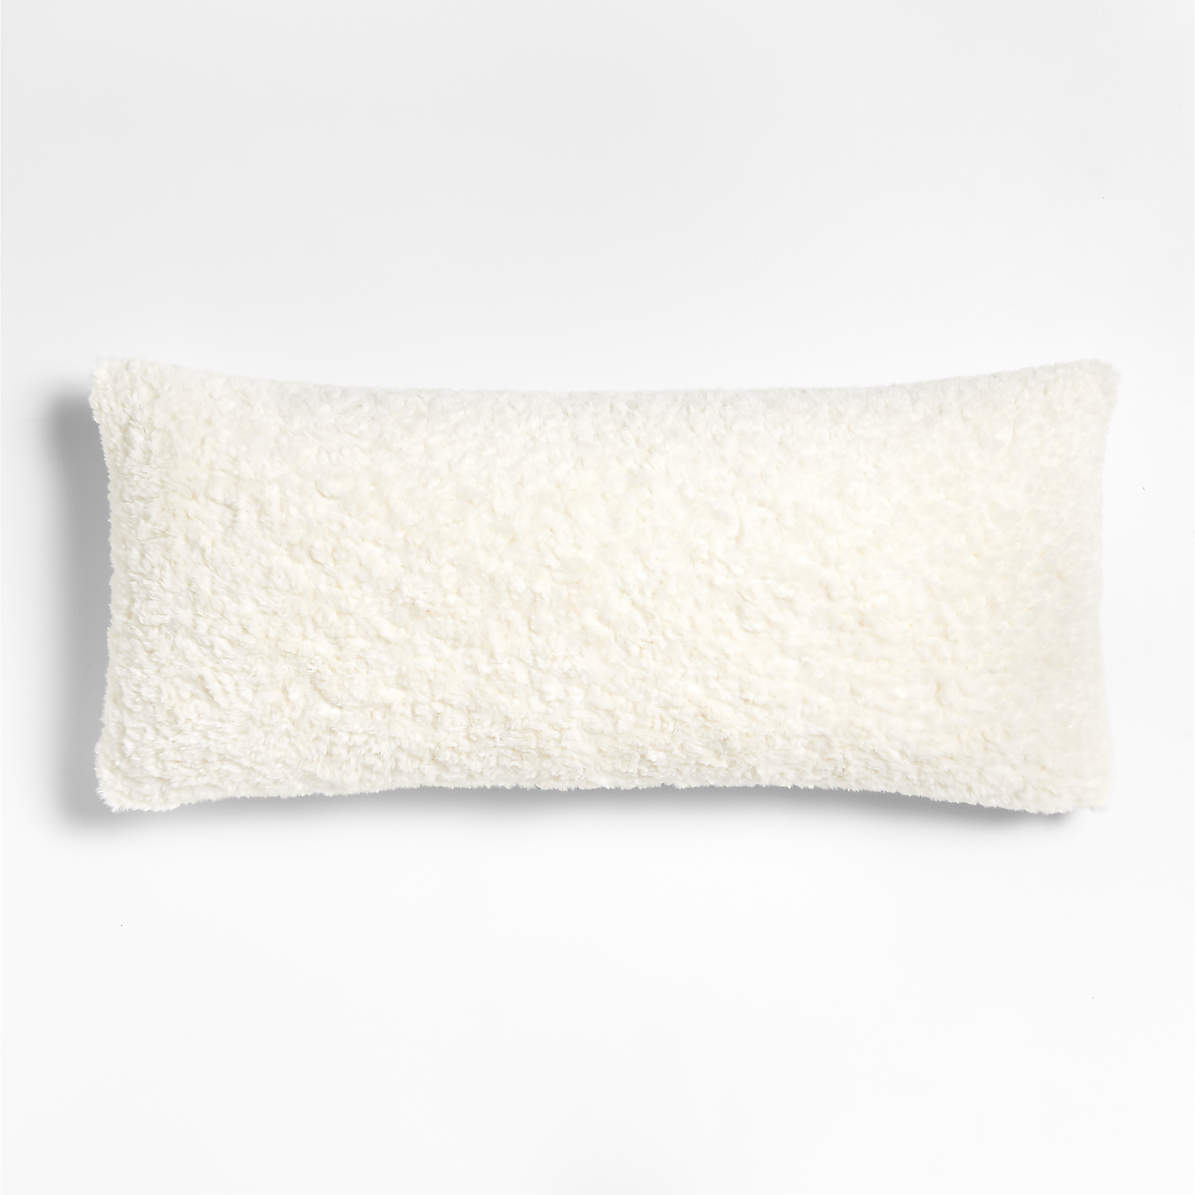 Extra Large Natural Sheepskin Sherpa Floor Pillow in Taupe